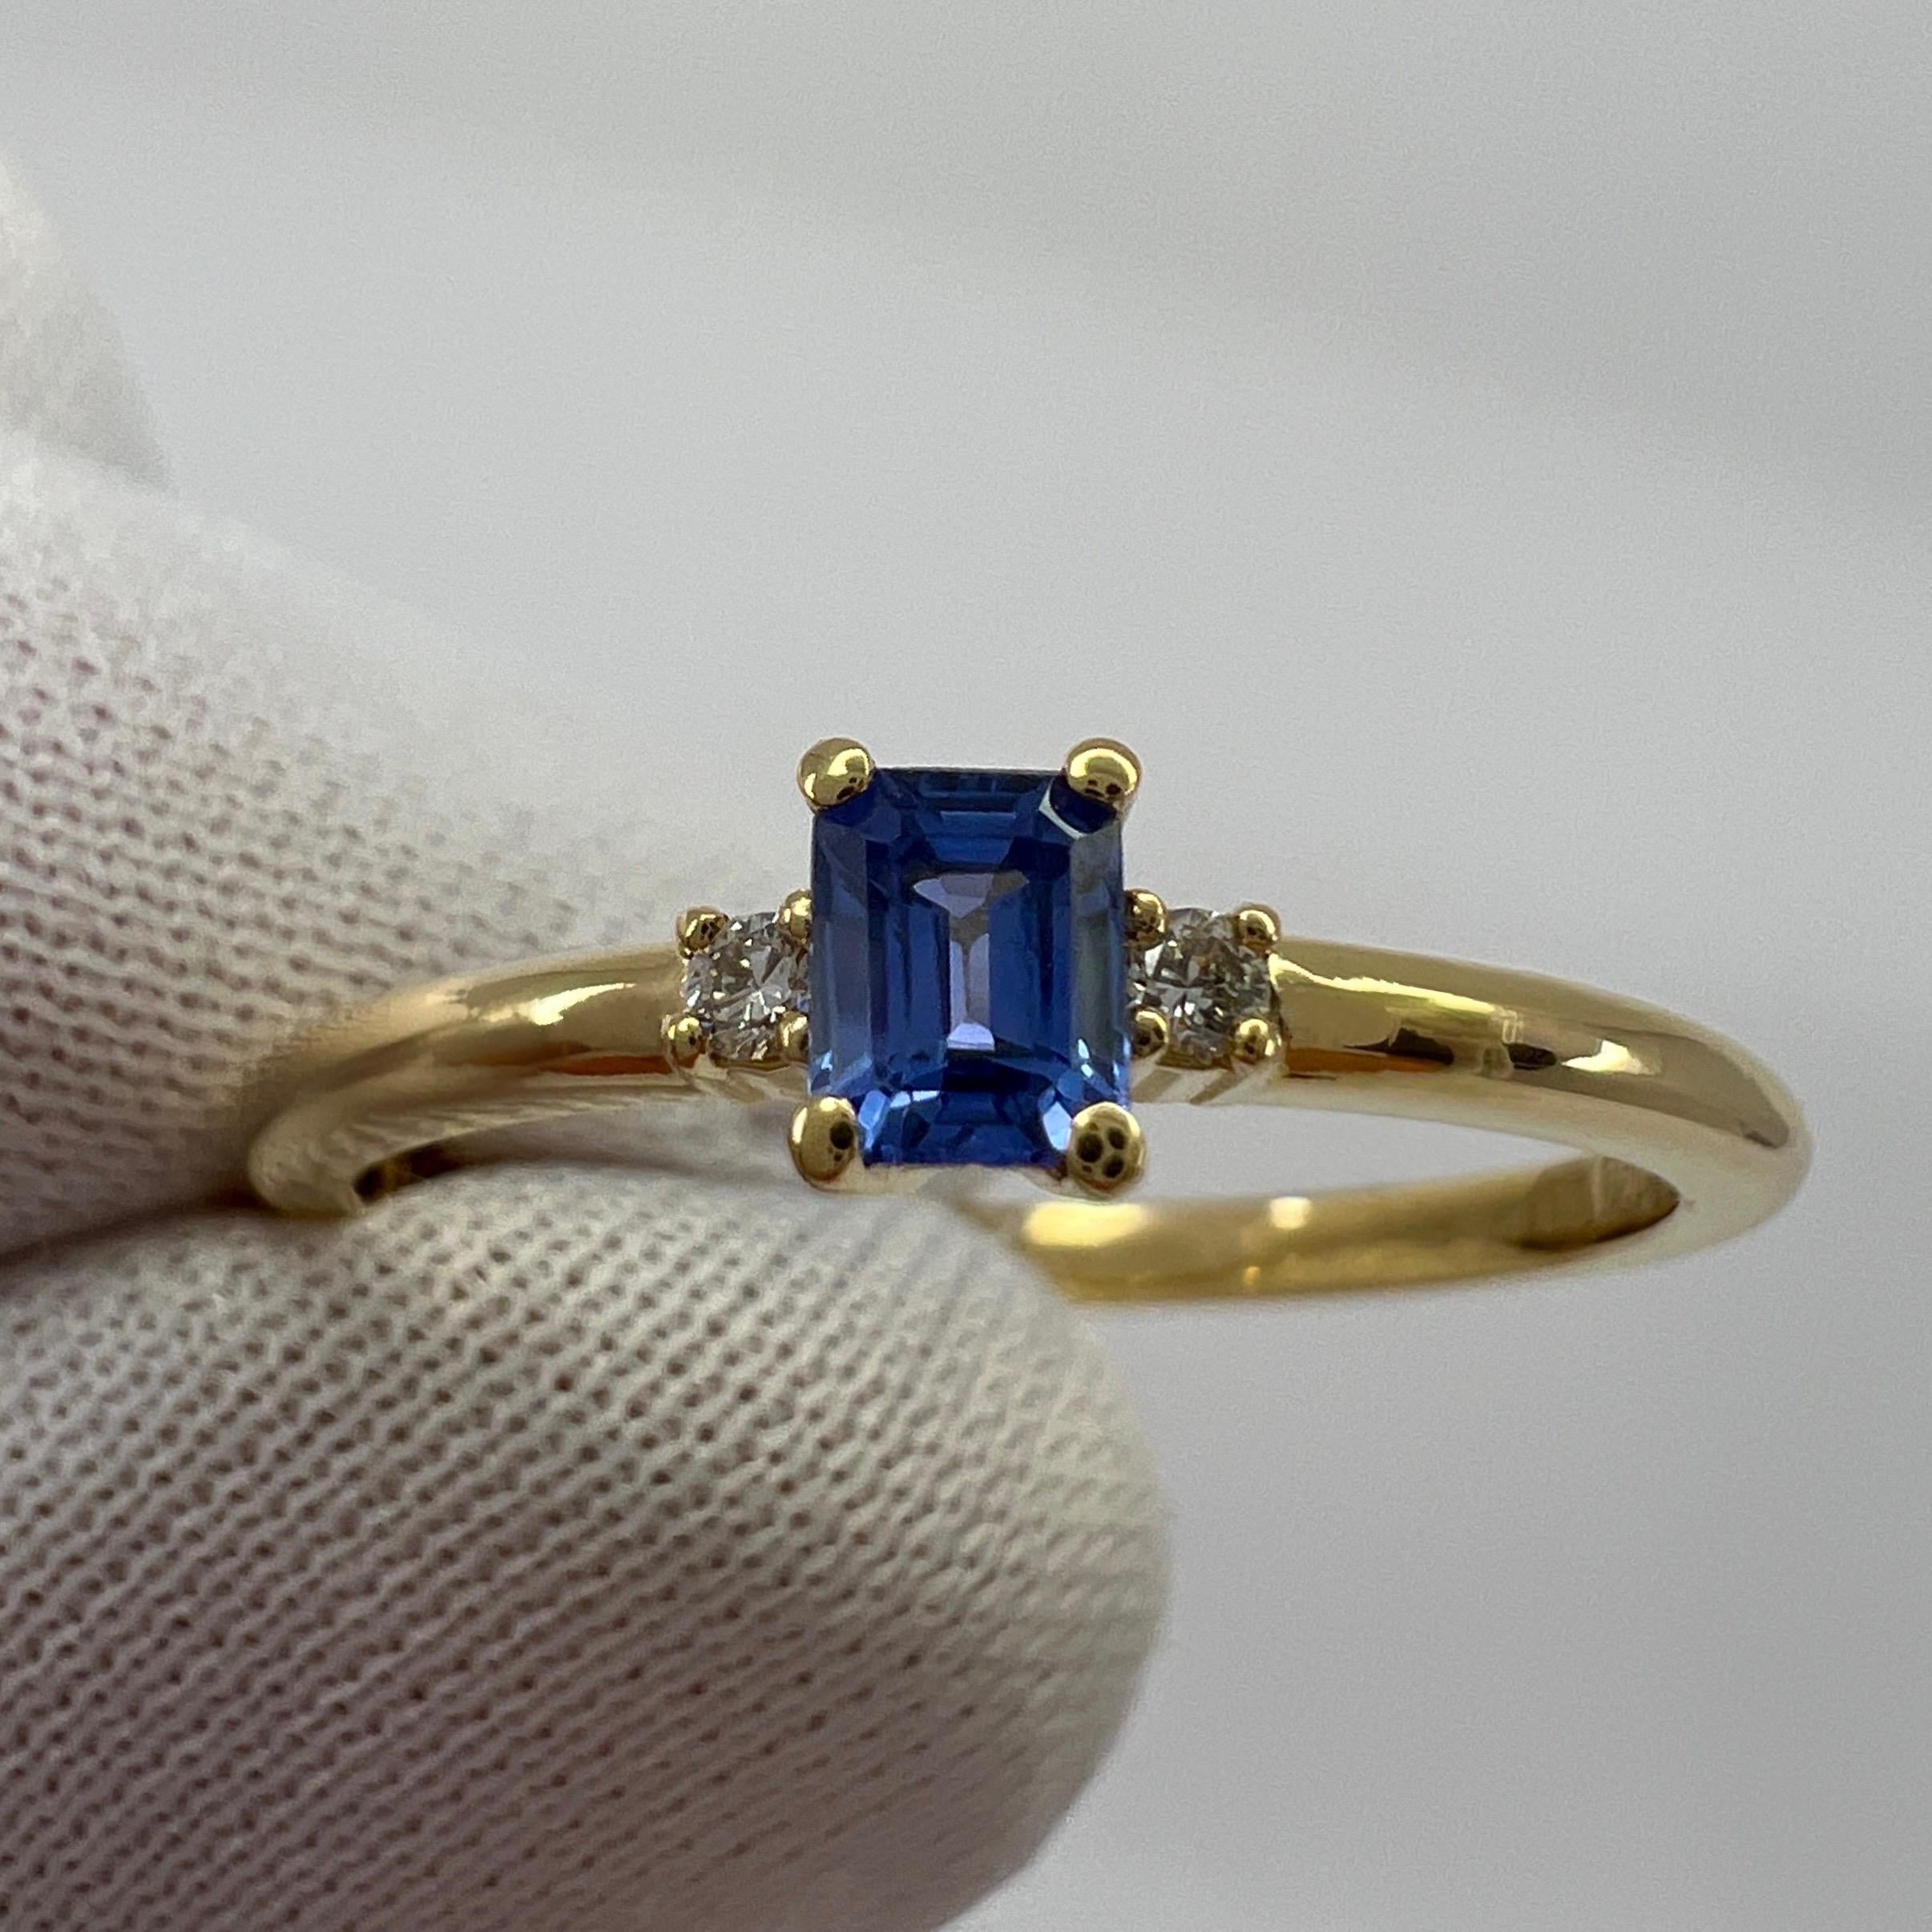 Natural Ceylon Blue Emerald Cut Sapphire & Diamond Three Stone 18k Yellow Gold Thin Ring.

Fine vivid blue emerald cut natural Ceylon sapphire centre stone. 0.25 carat measuring 3.8x2.8mm. Excellent emerald/octagon cut and excellent